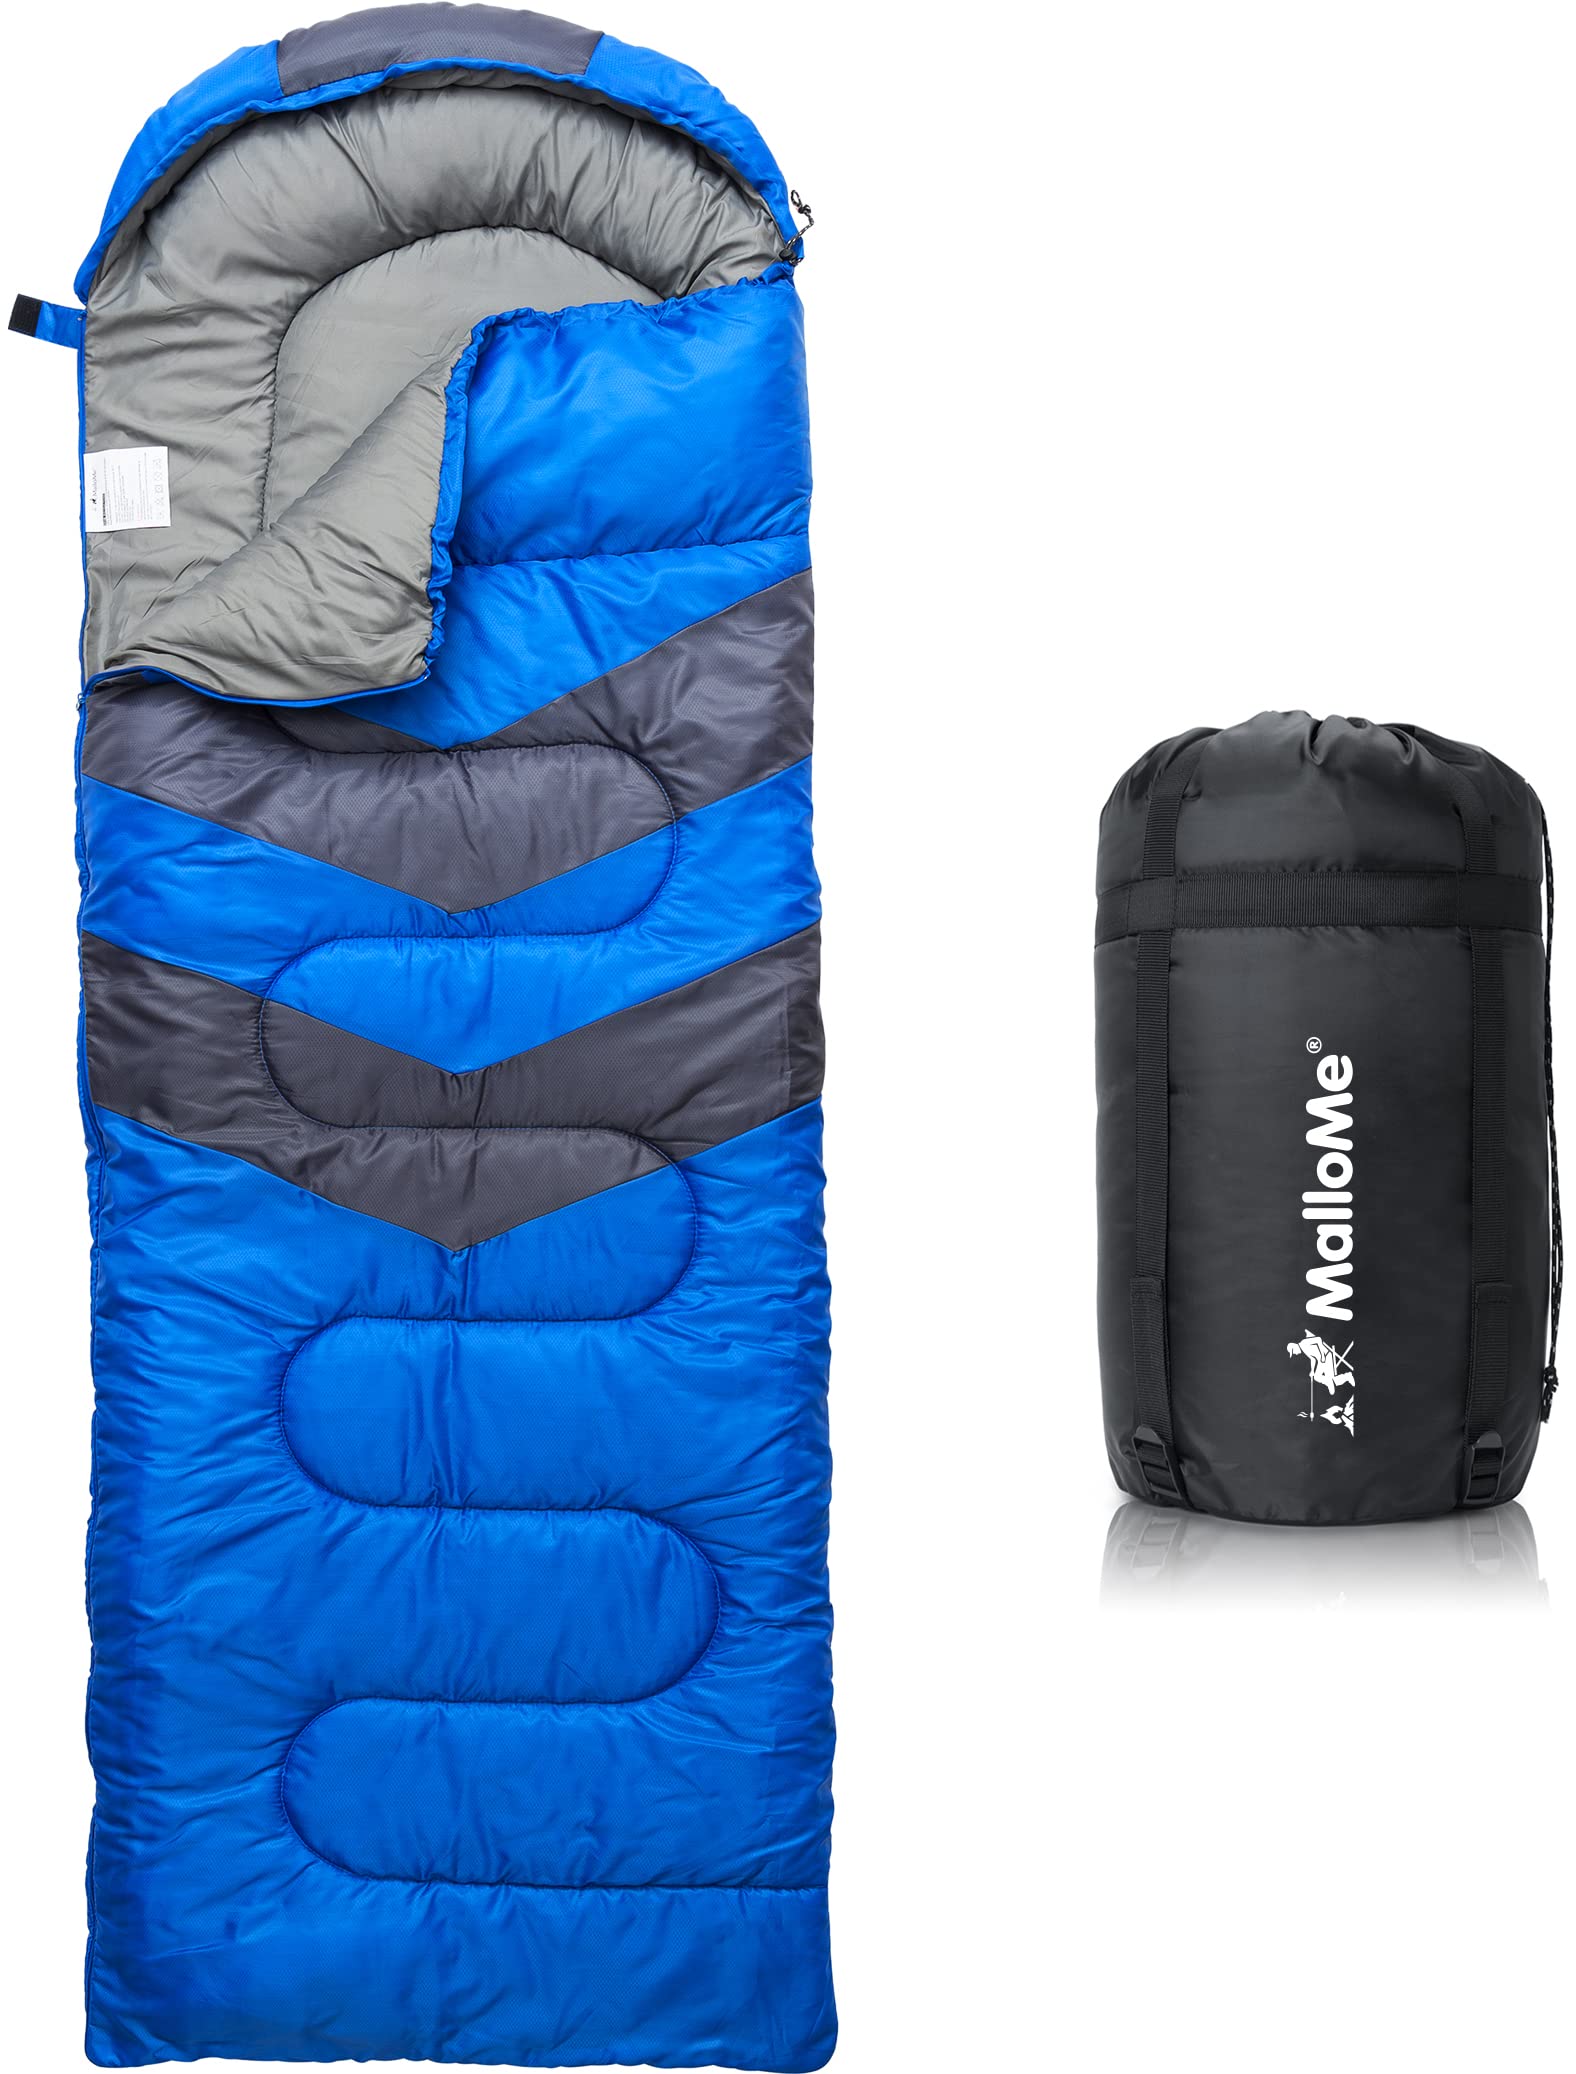 MalloMe Sleeping Bags for Adults Cold Weather & Warm - Backpacking Camping  Sleeping Bag for Kids 10-12, Girls, Boys - Lightweight Compact Camping Gear